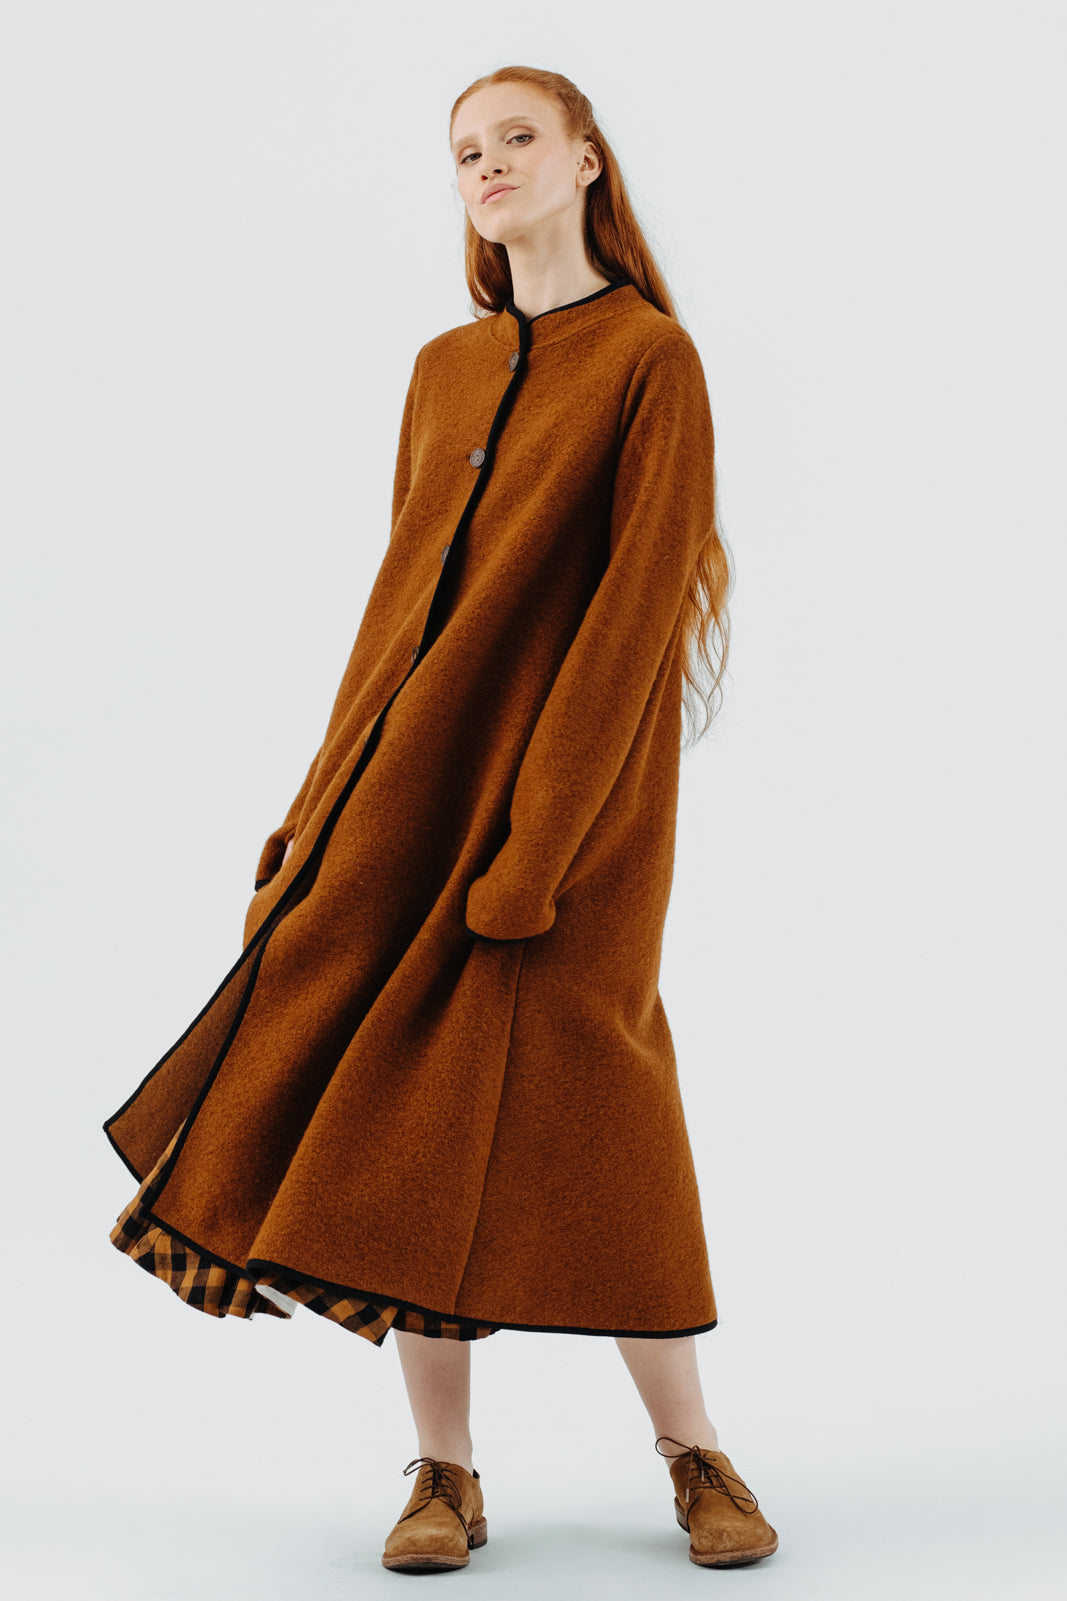 Classic Coat, Wool#color_warm-brown